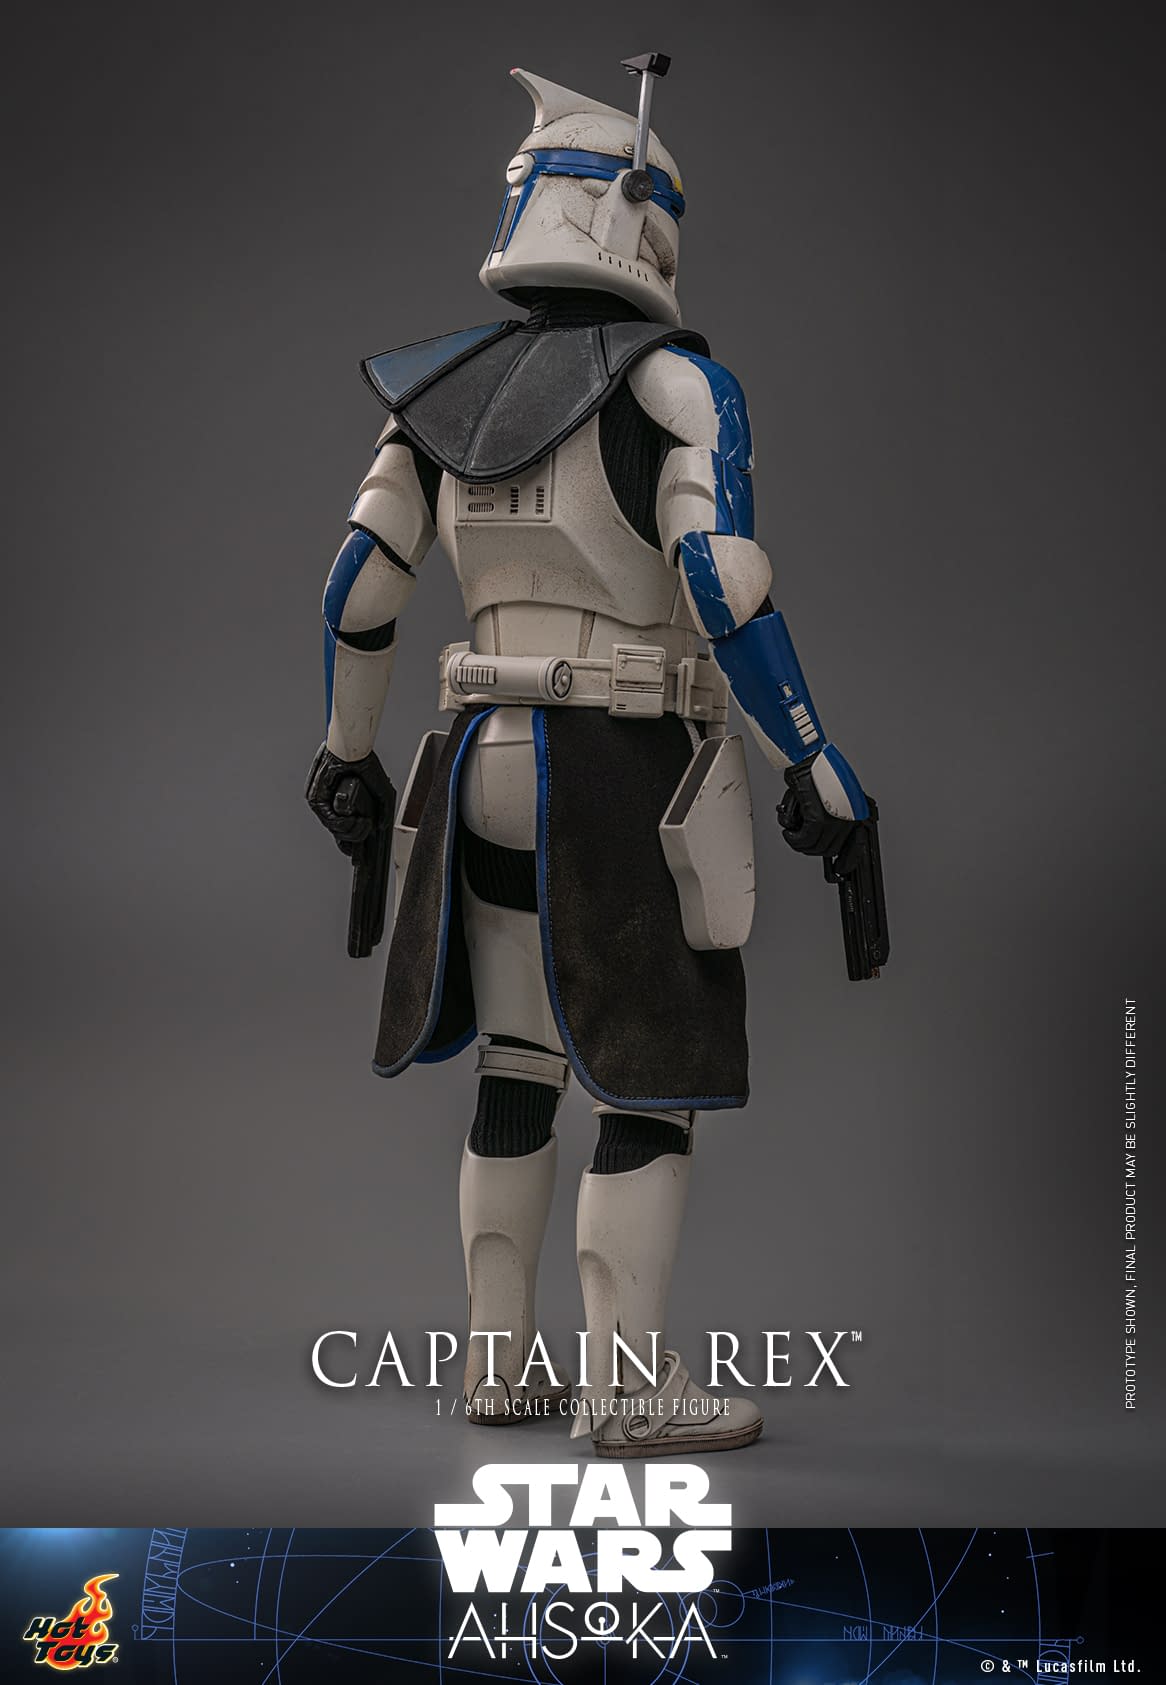 Captain Rex Returns to Hot Toys with New Star Wars 1/6 Scale Release4